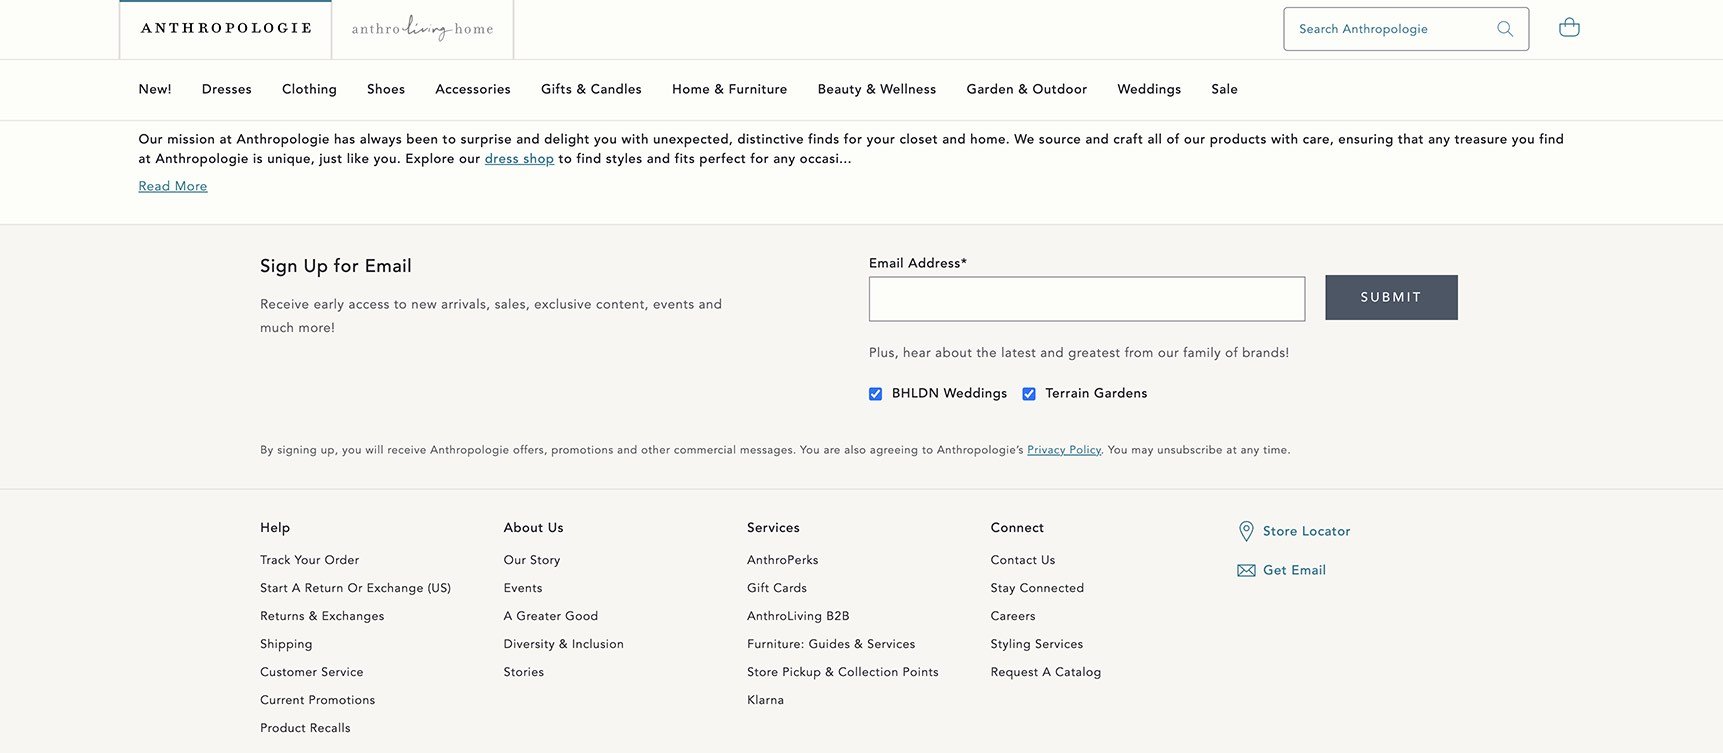 Newsletter sign-up form example, anthropologie homepage with signup form at the bottom of the page above the footer